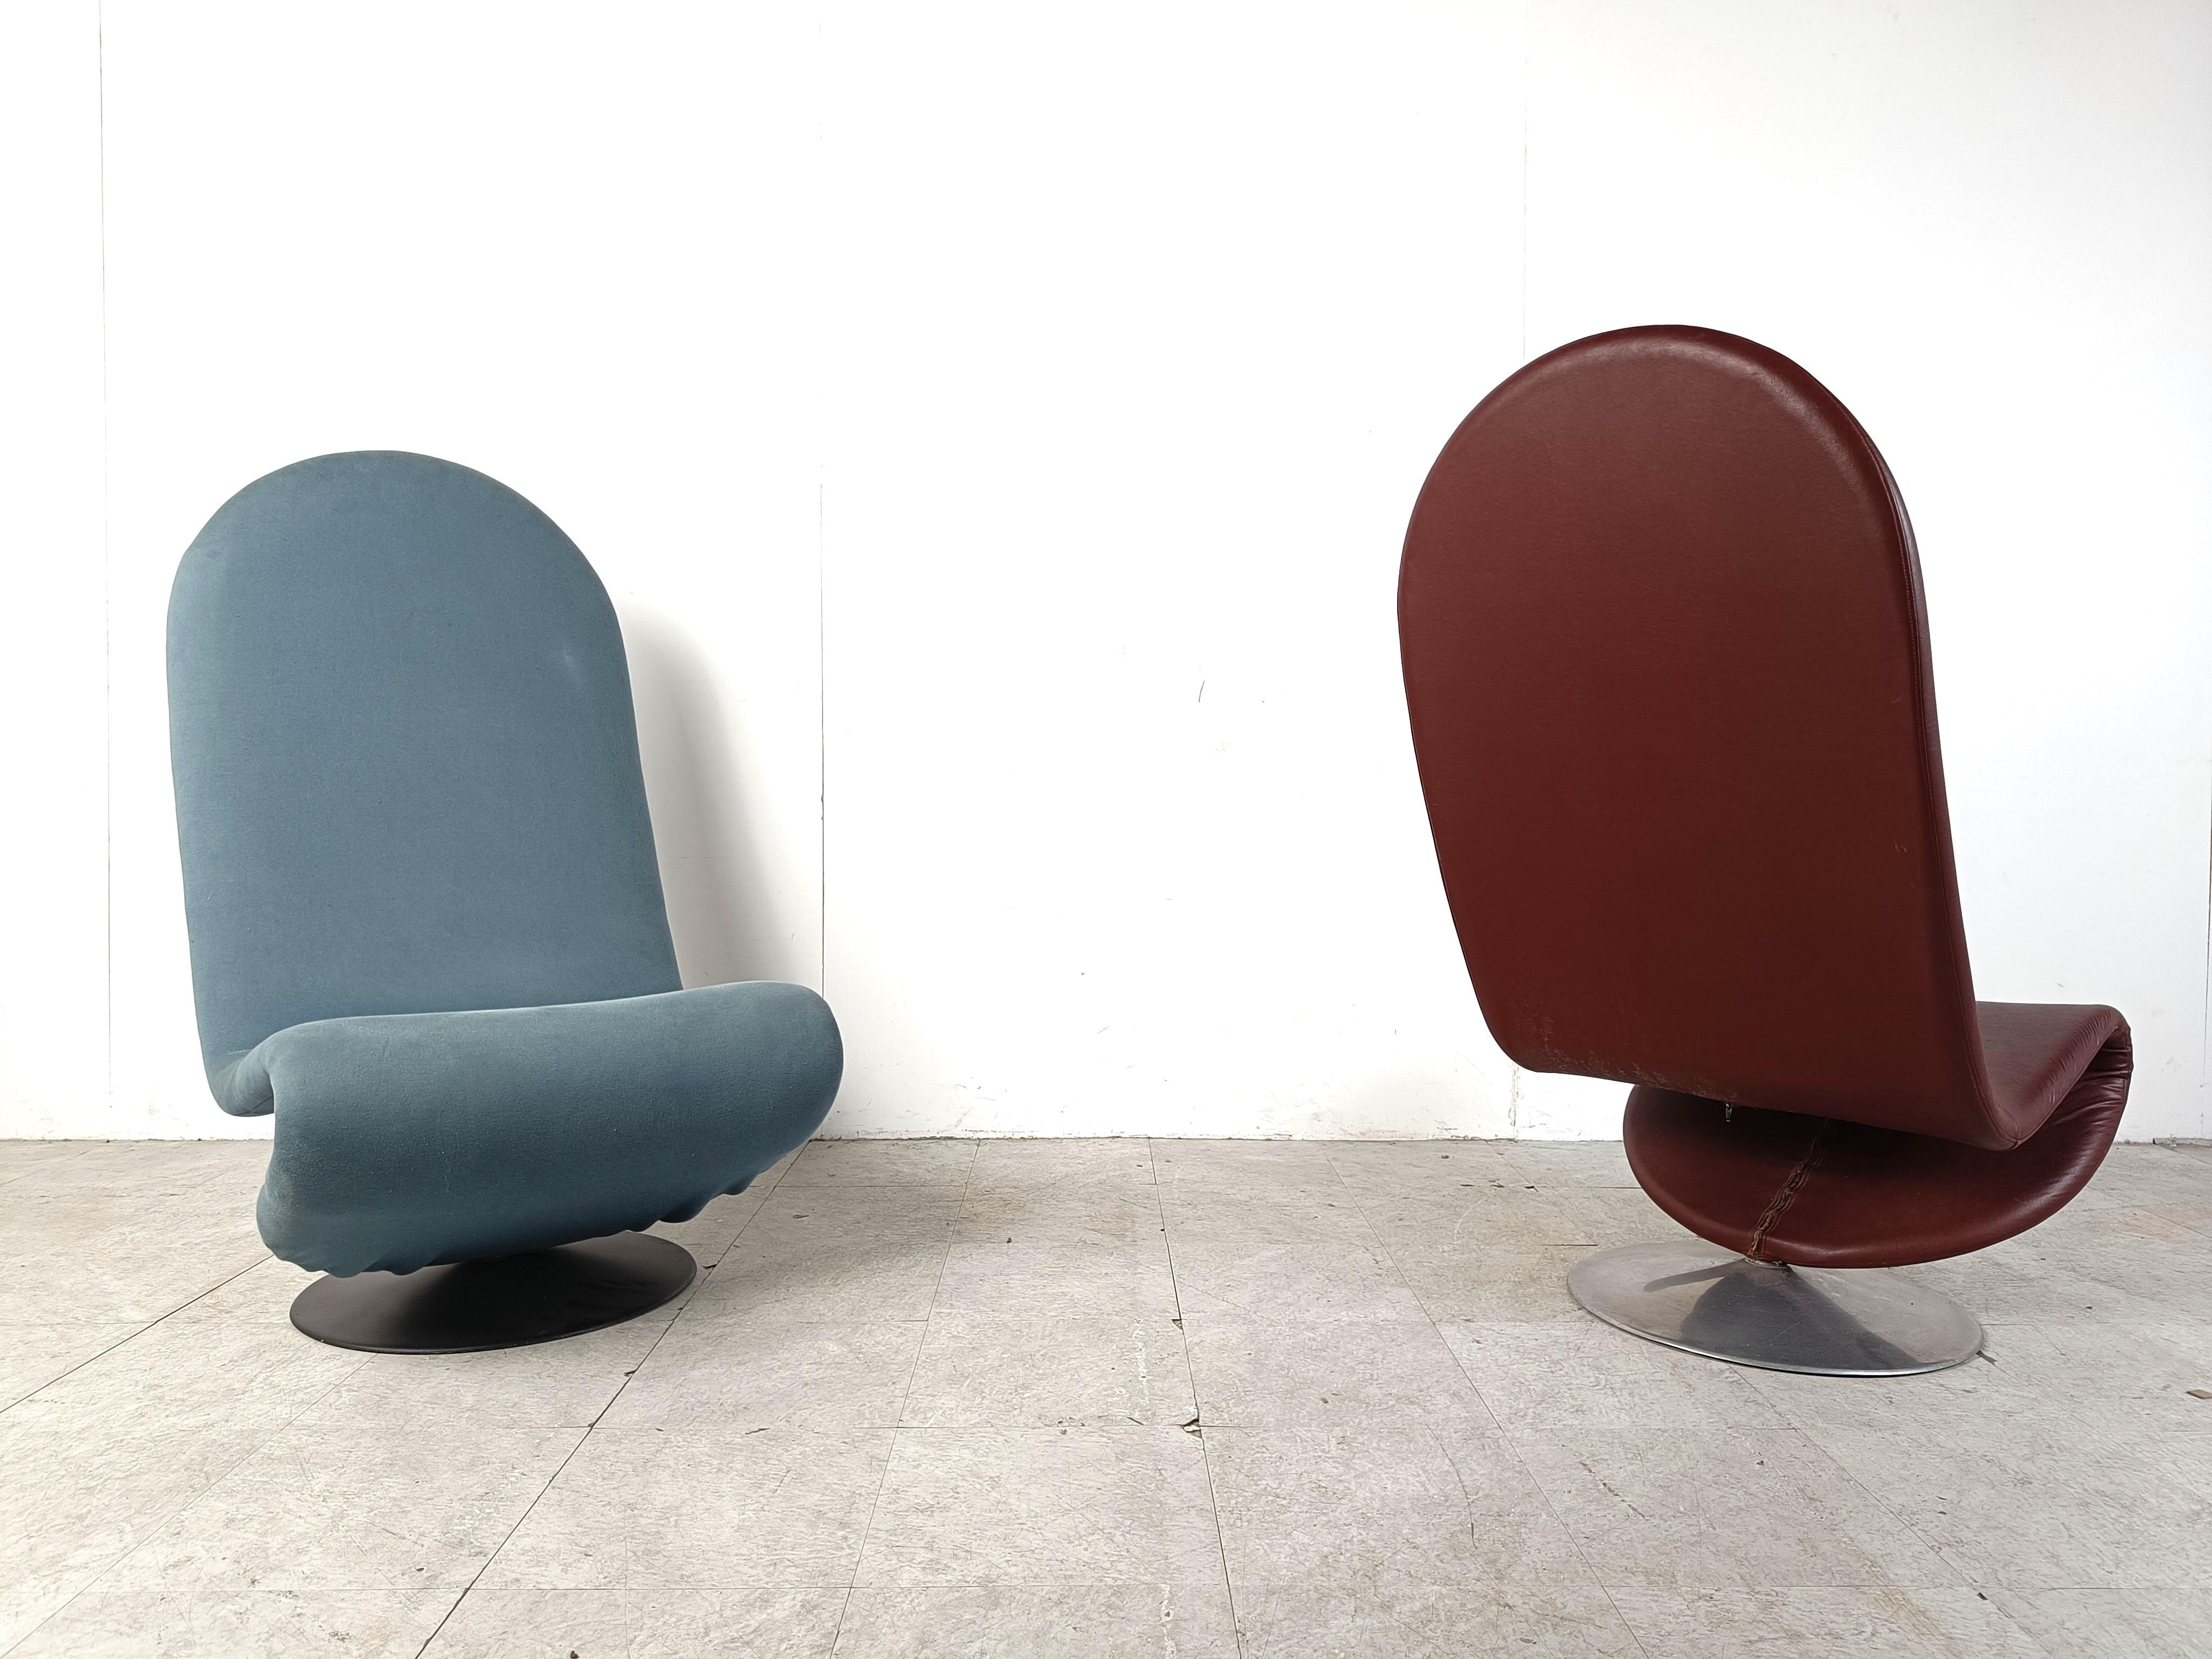 Rare pair of 'System 123' chairs by Verner Panton for Fritz Hansen in blue fabric and red leatherette.

Beautiful curvy and cantilevered design.

Originally designed in 1973.

Good condition.

1970s - Denmark

Source: Book Verner Panton, Vitra